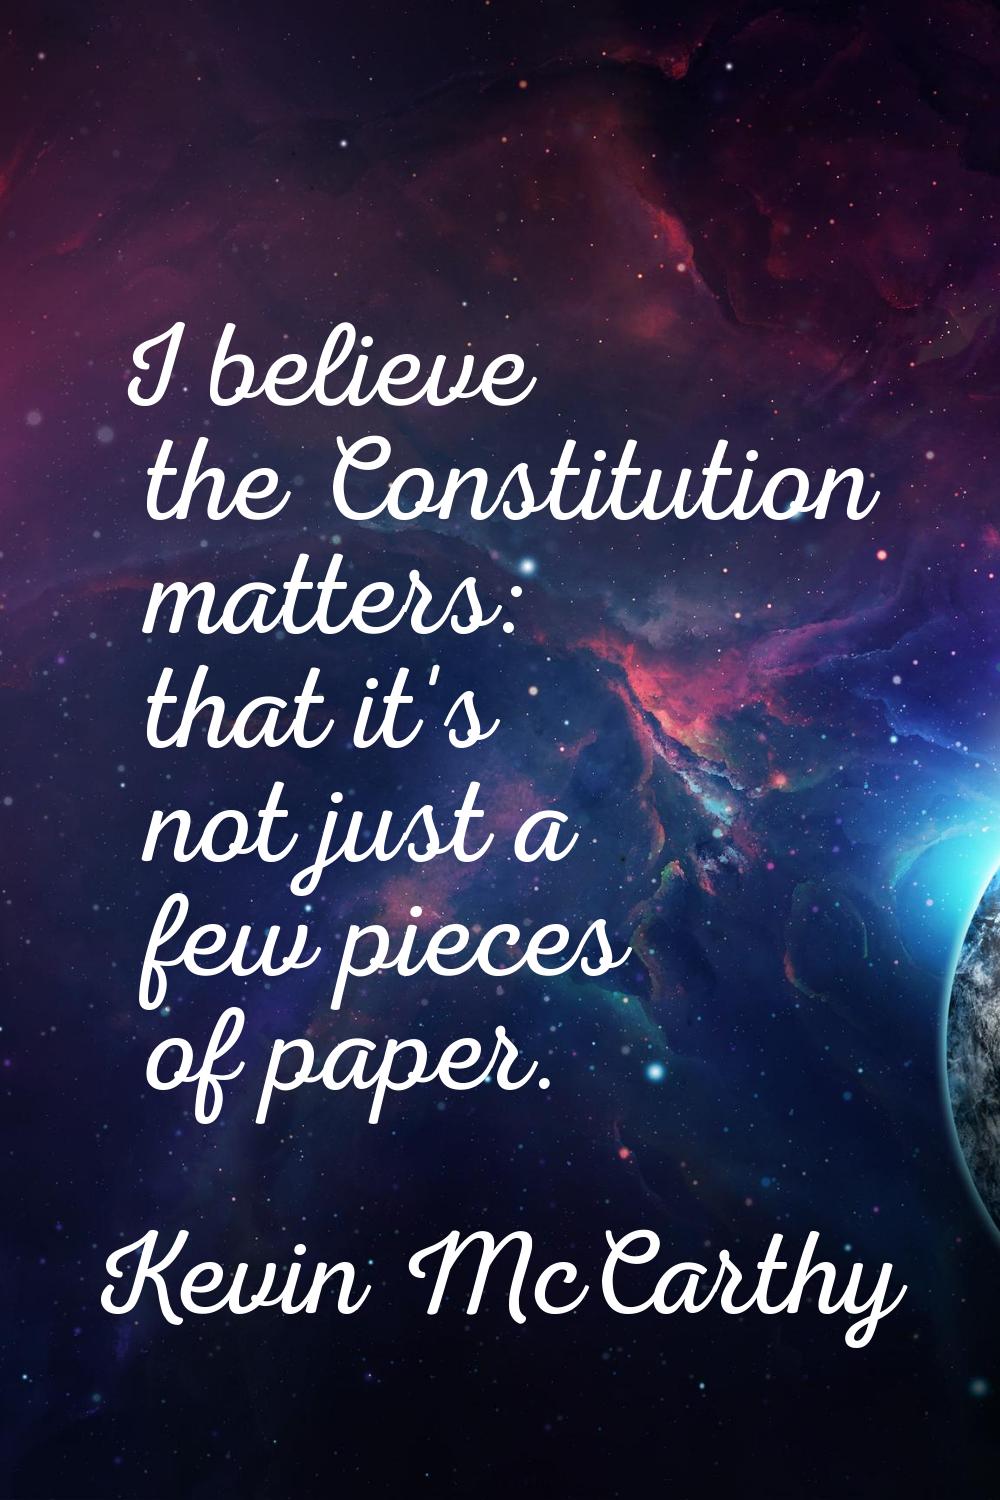 I believe the Constitution matters: that it's not just a few pieces of paper.